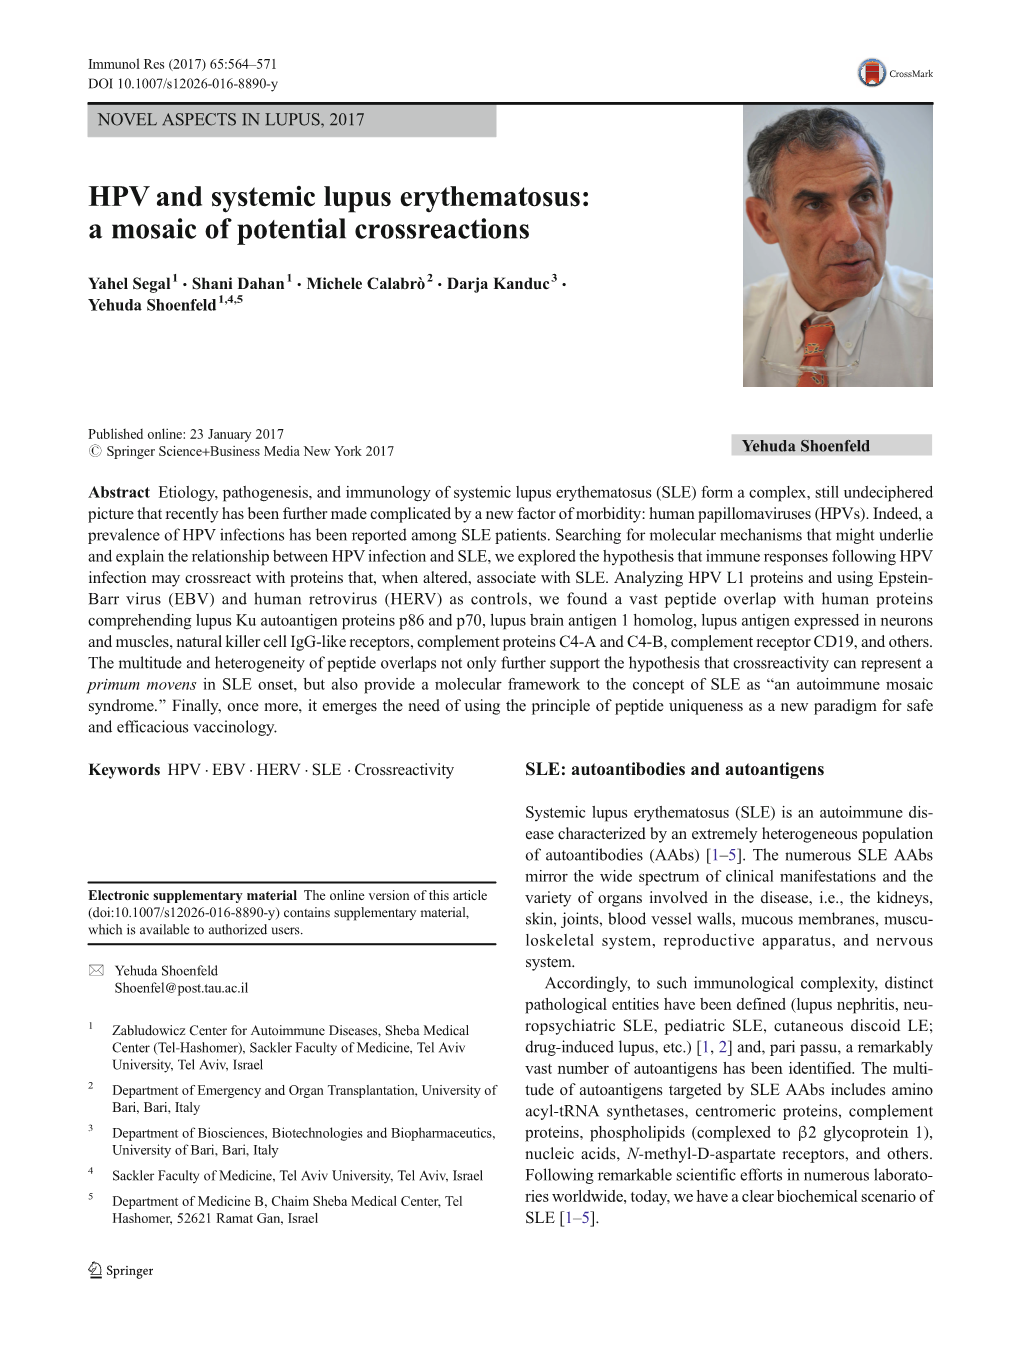 HPV and Systemic Lupus Erythematosus: a Mosaic of Potential Crossreactions